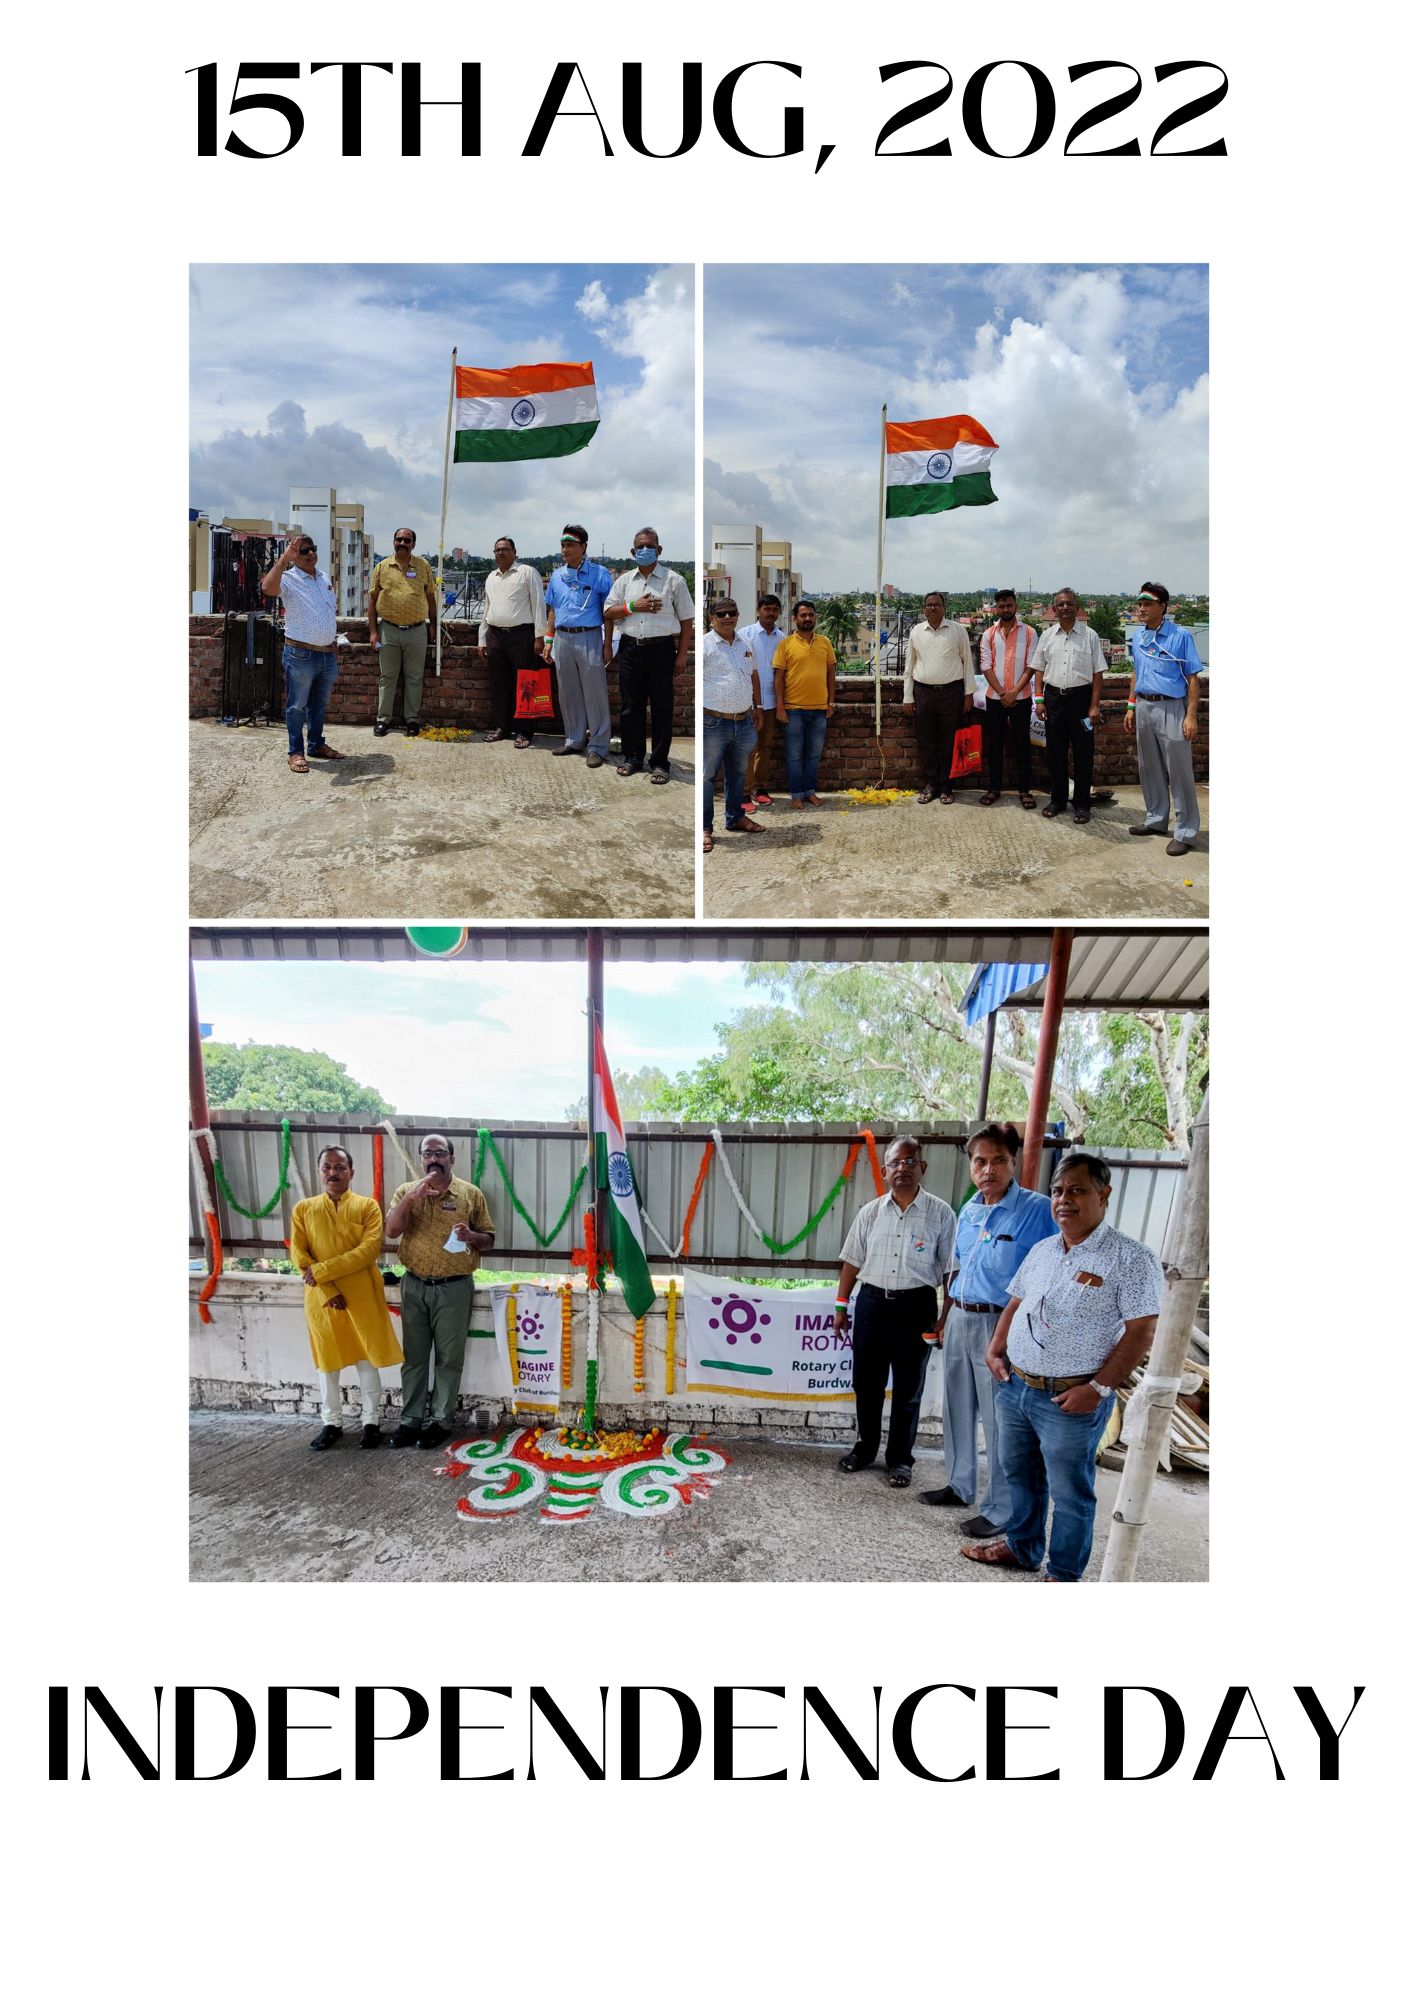 INDEPENDENCE DAY CELEBRATION (15 AUGUST)